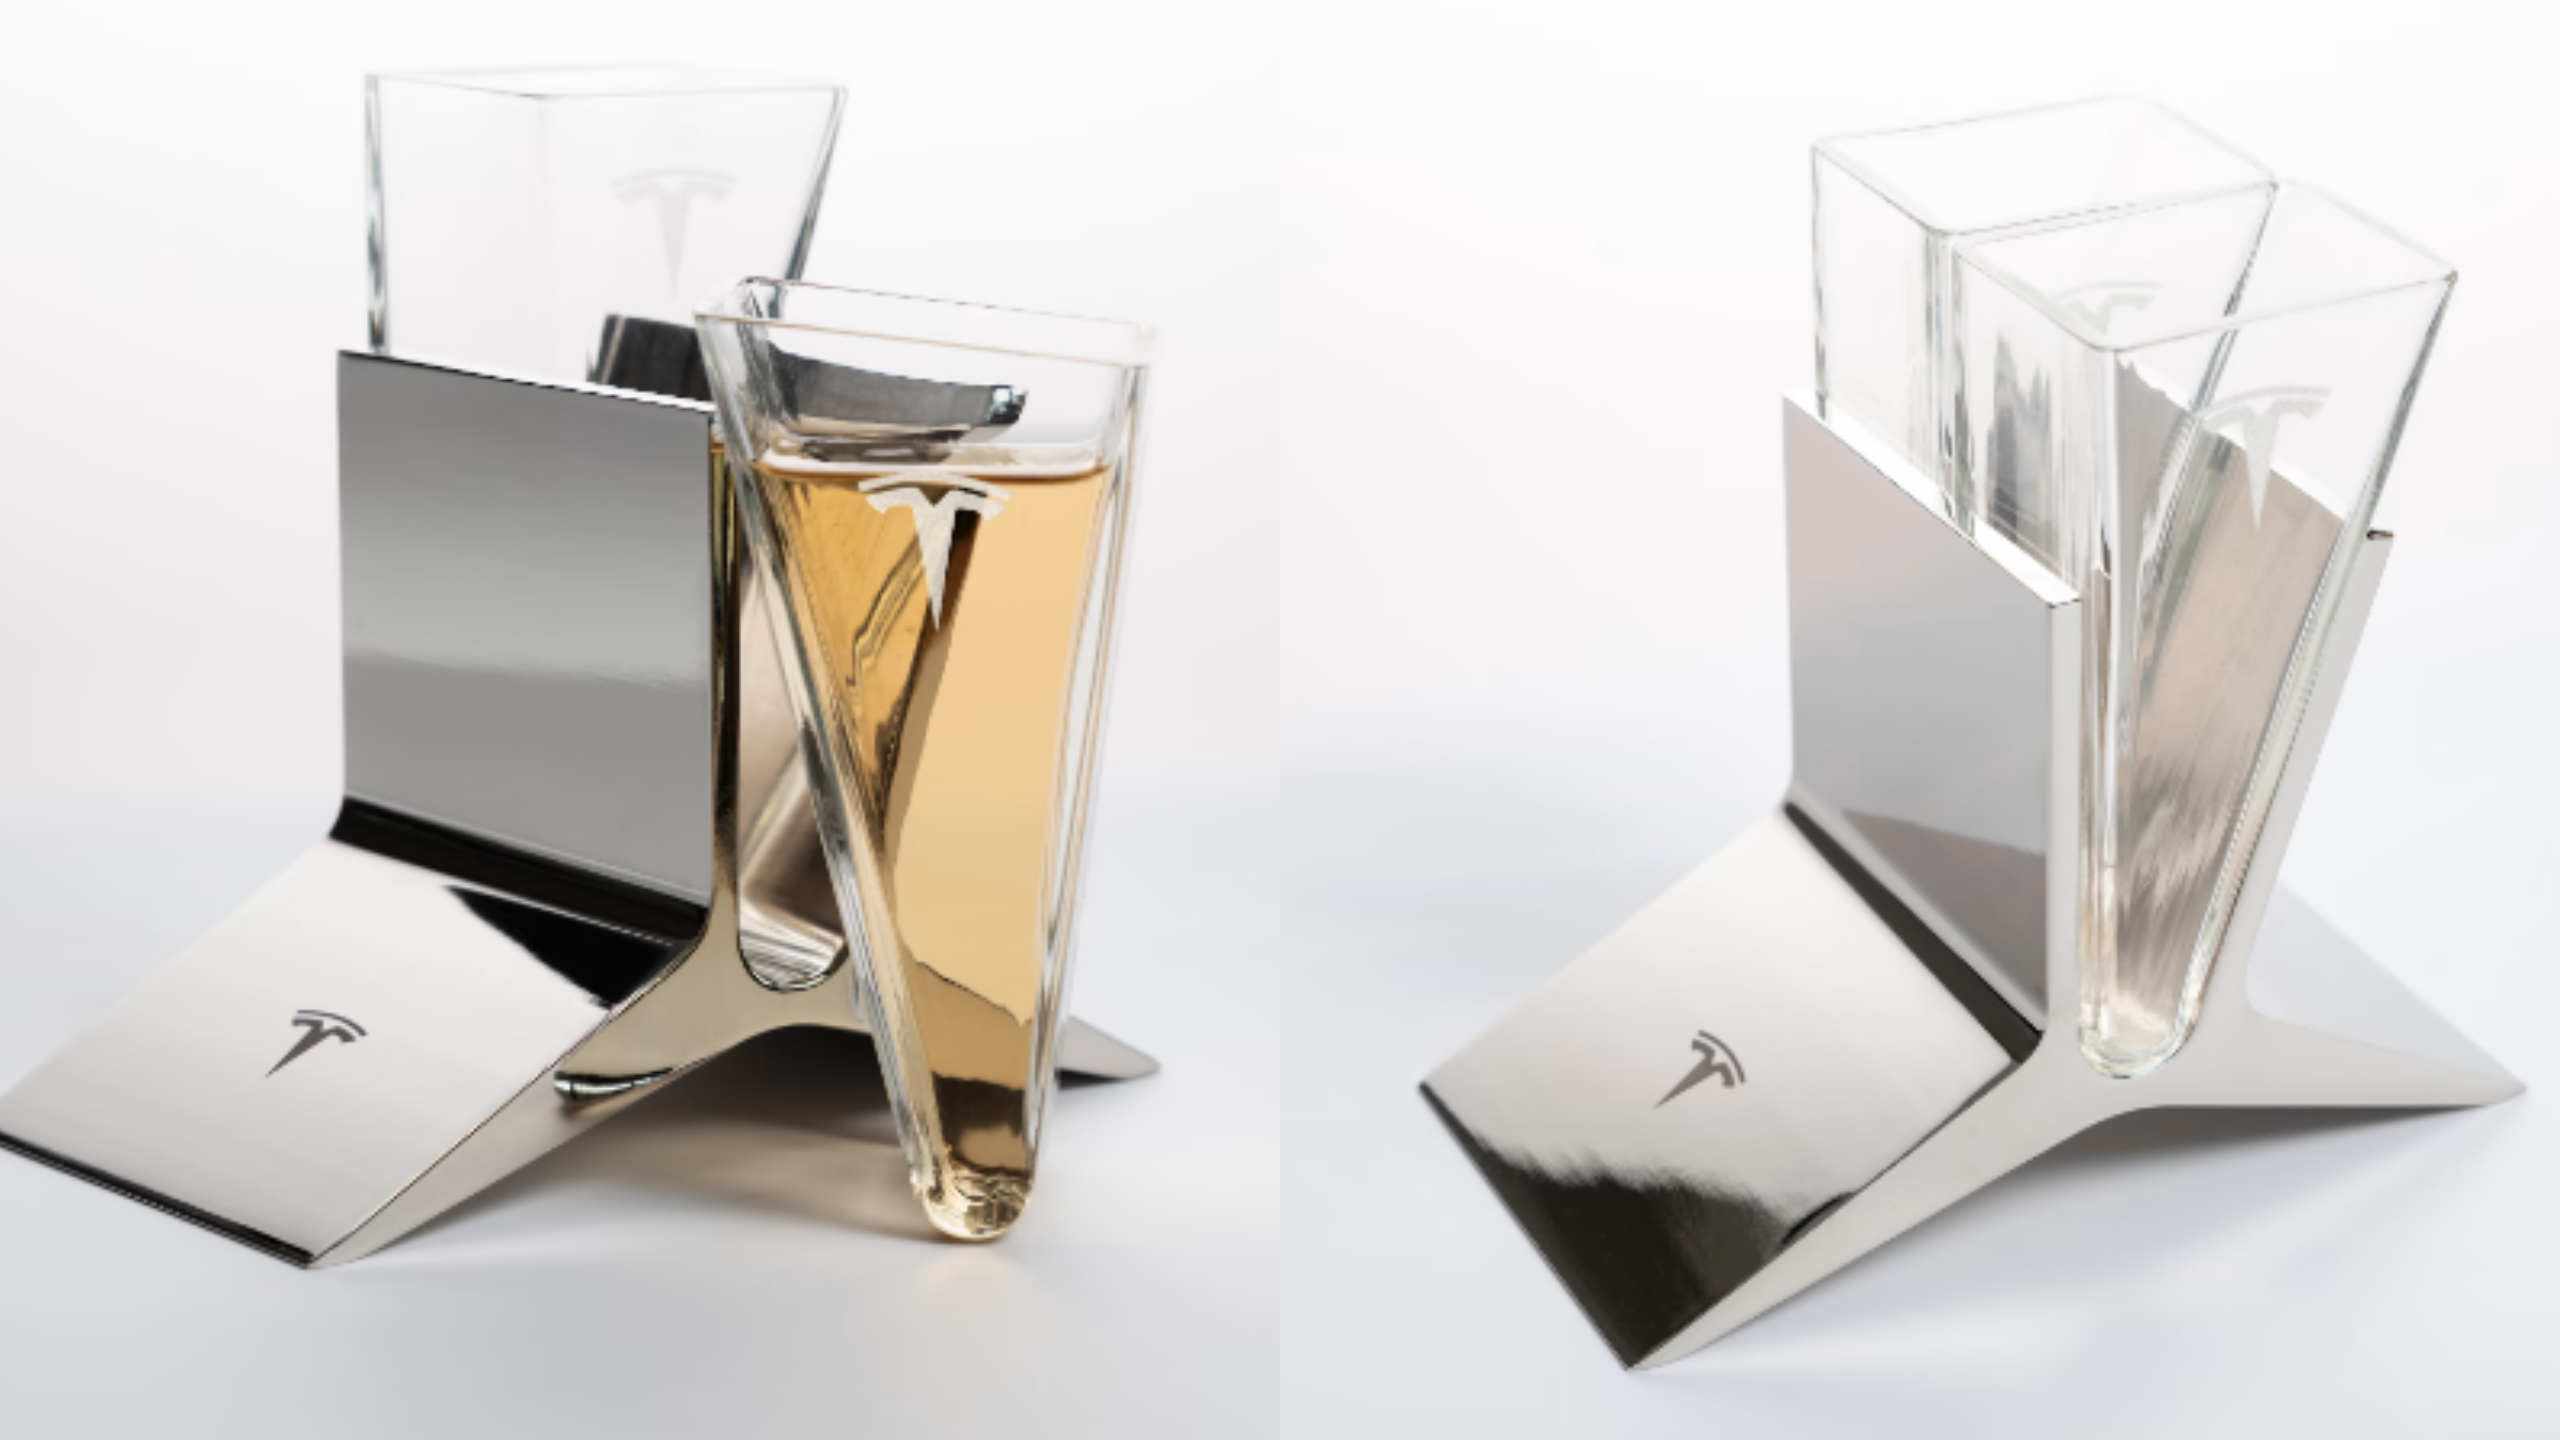 Tesla launches limited edition Sipping Glasses